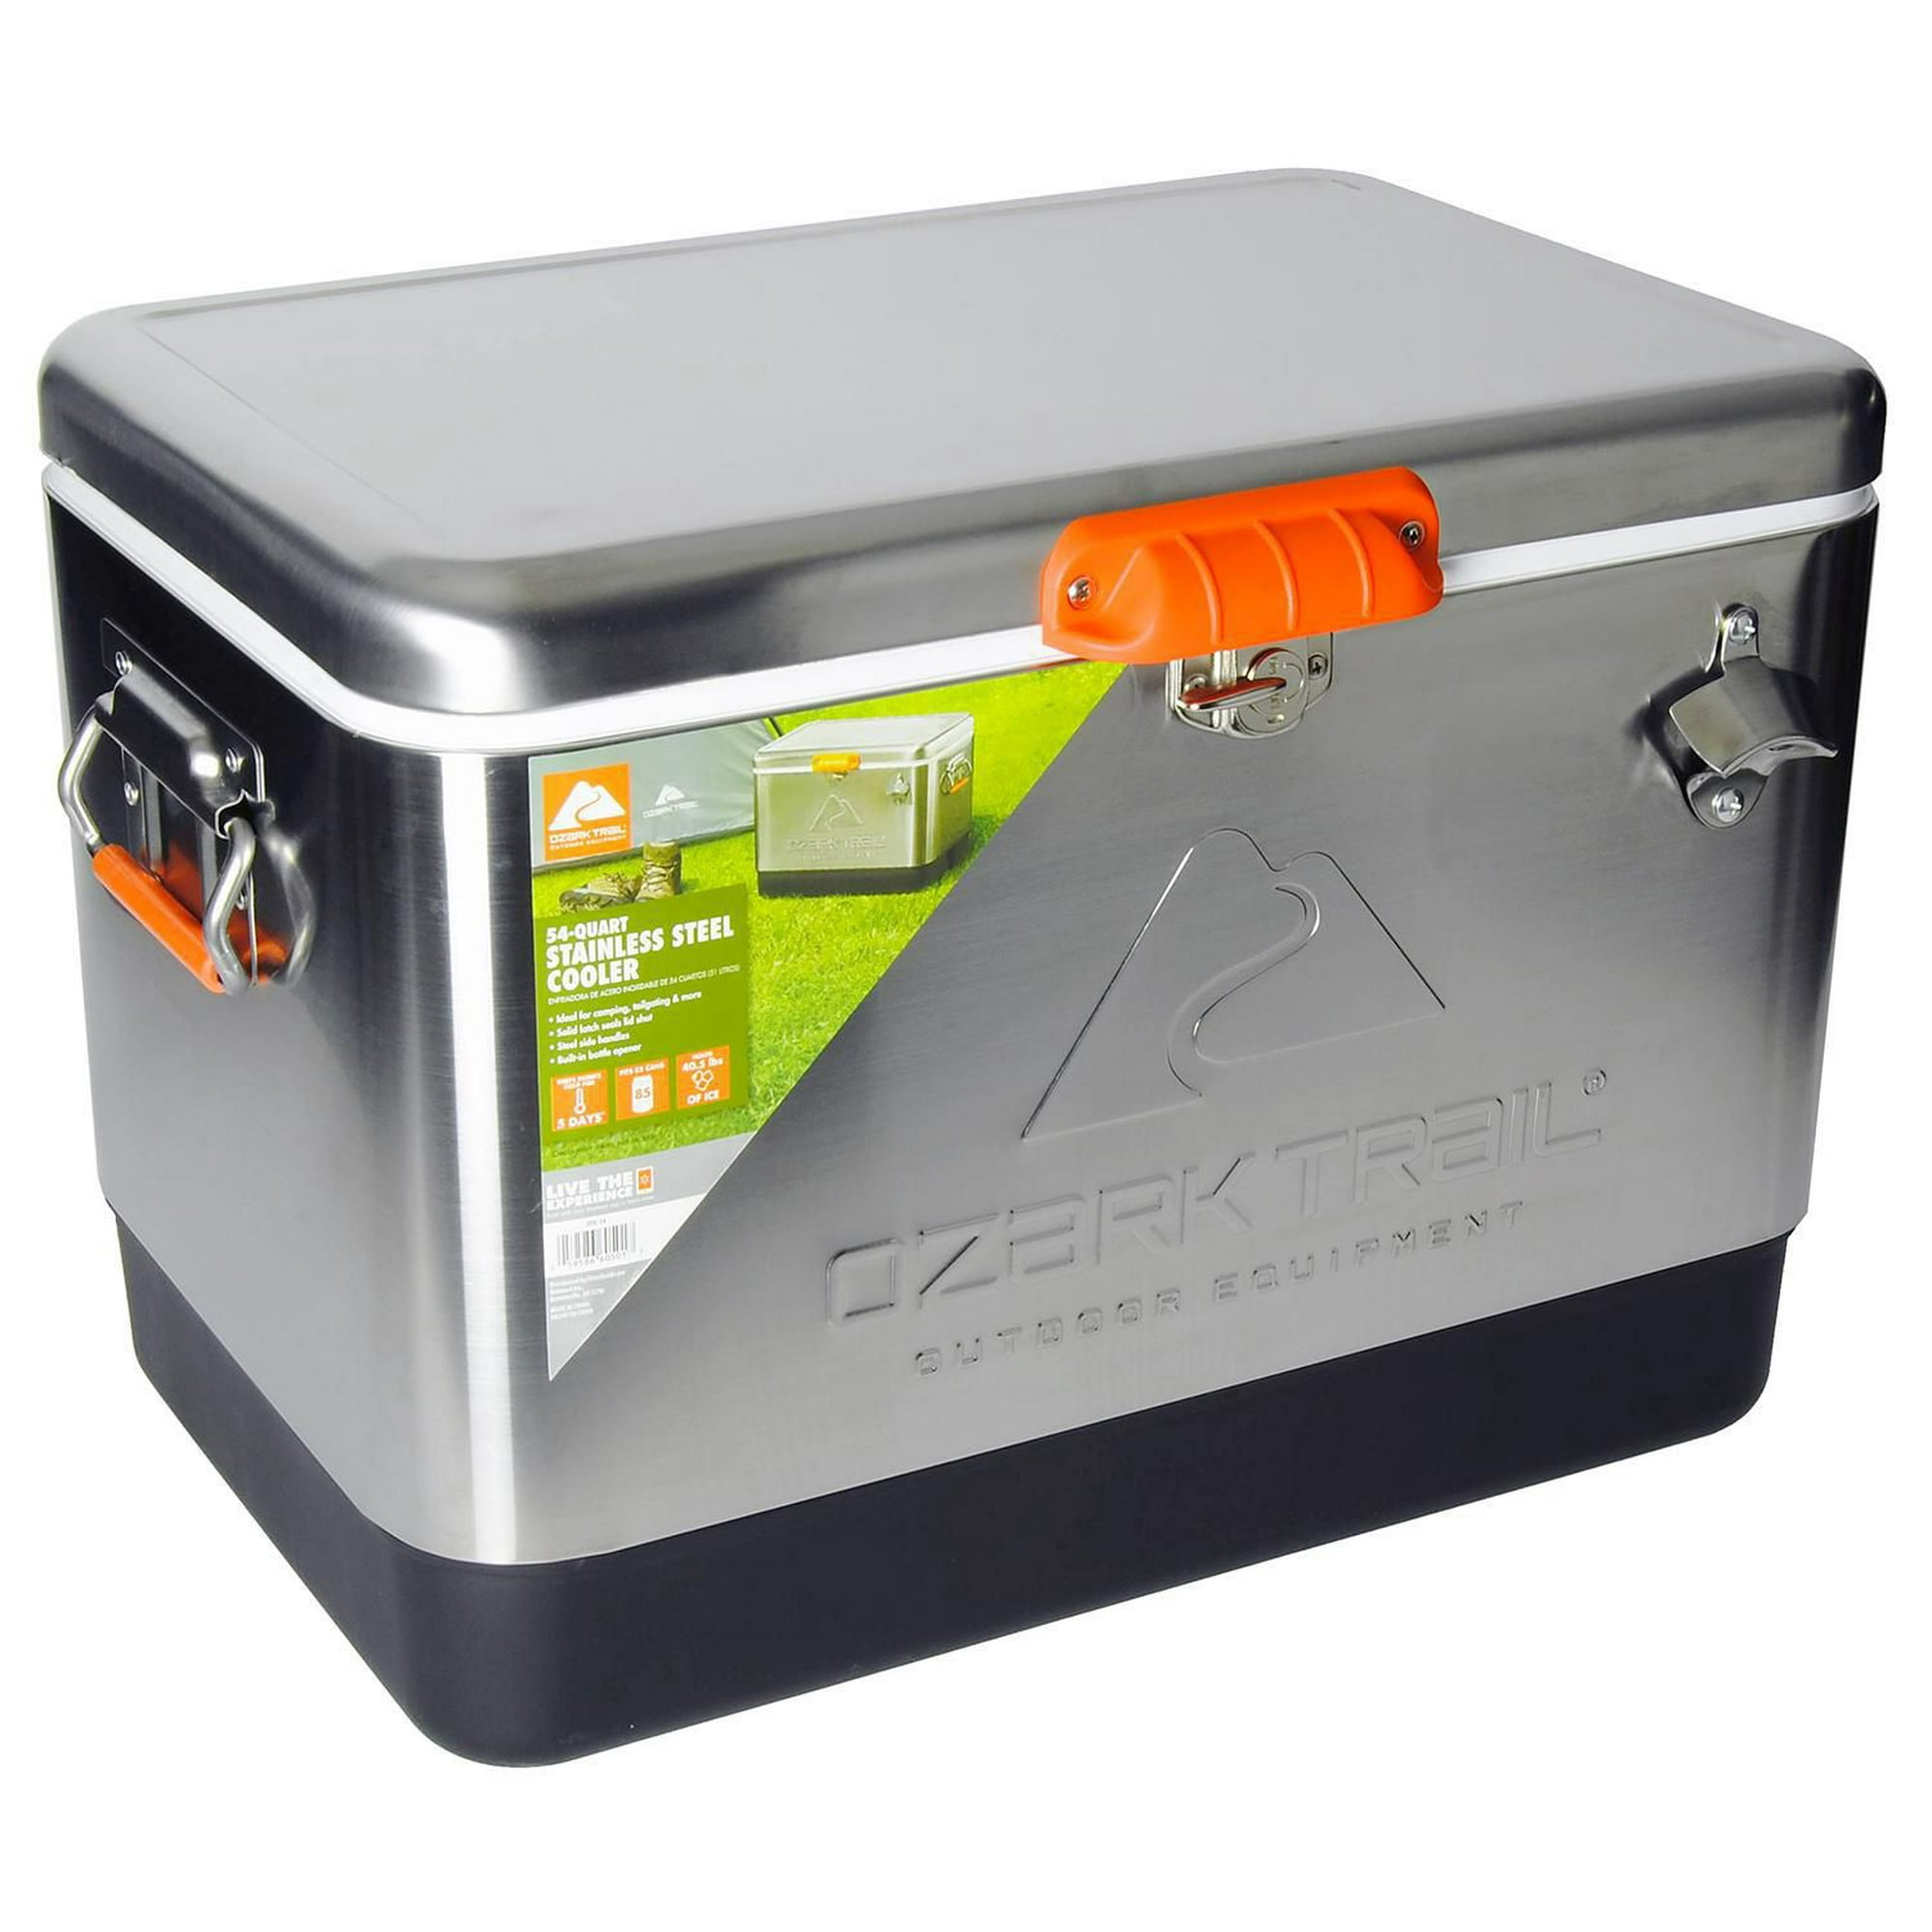 Ozark Trail 85 Can Stainless Steel Ice Chest Cooler with Bottle Opener Ice  cooler (54 Quarts/51 Liters) 